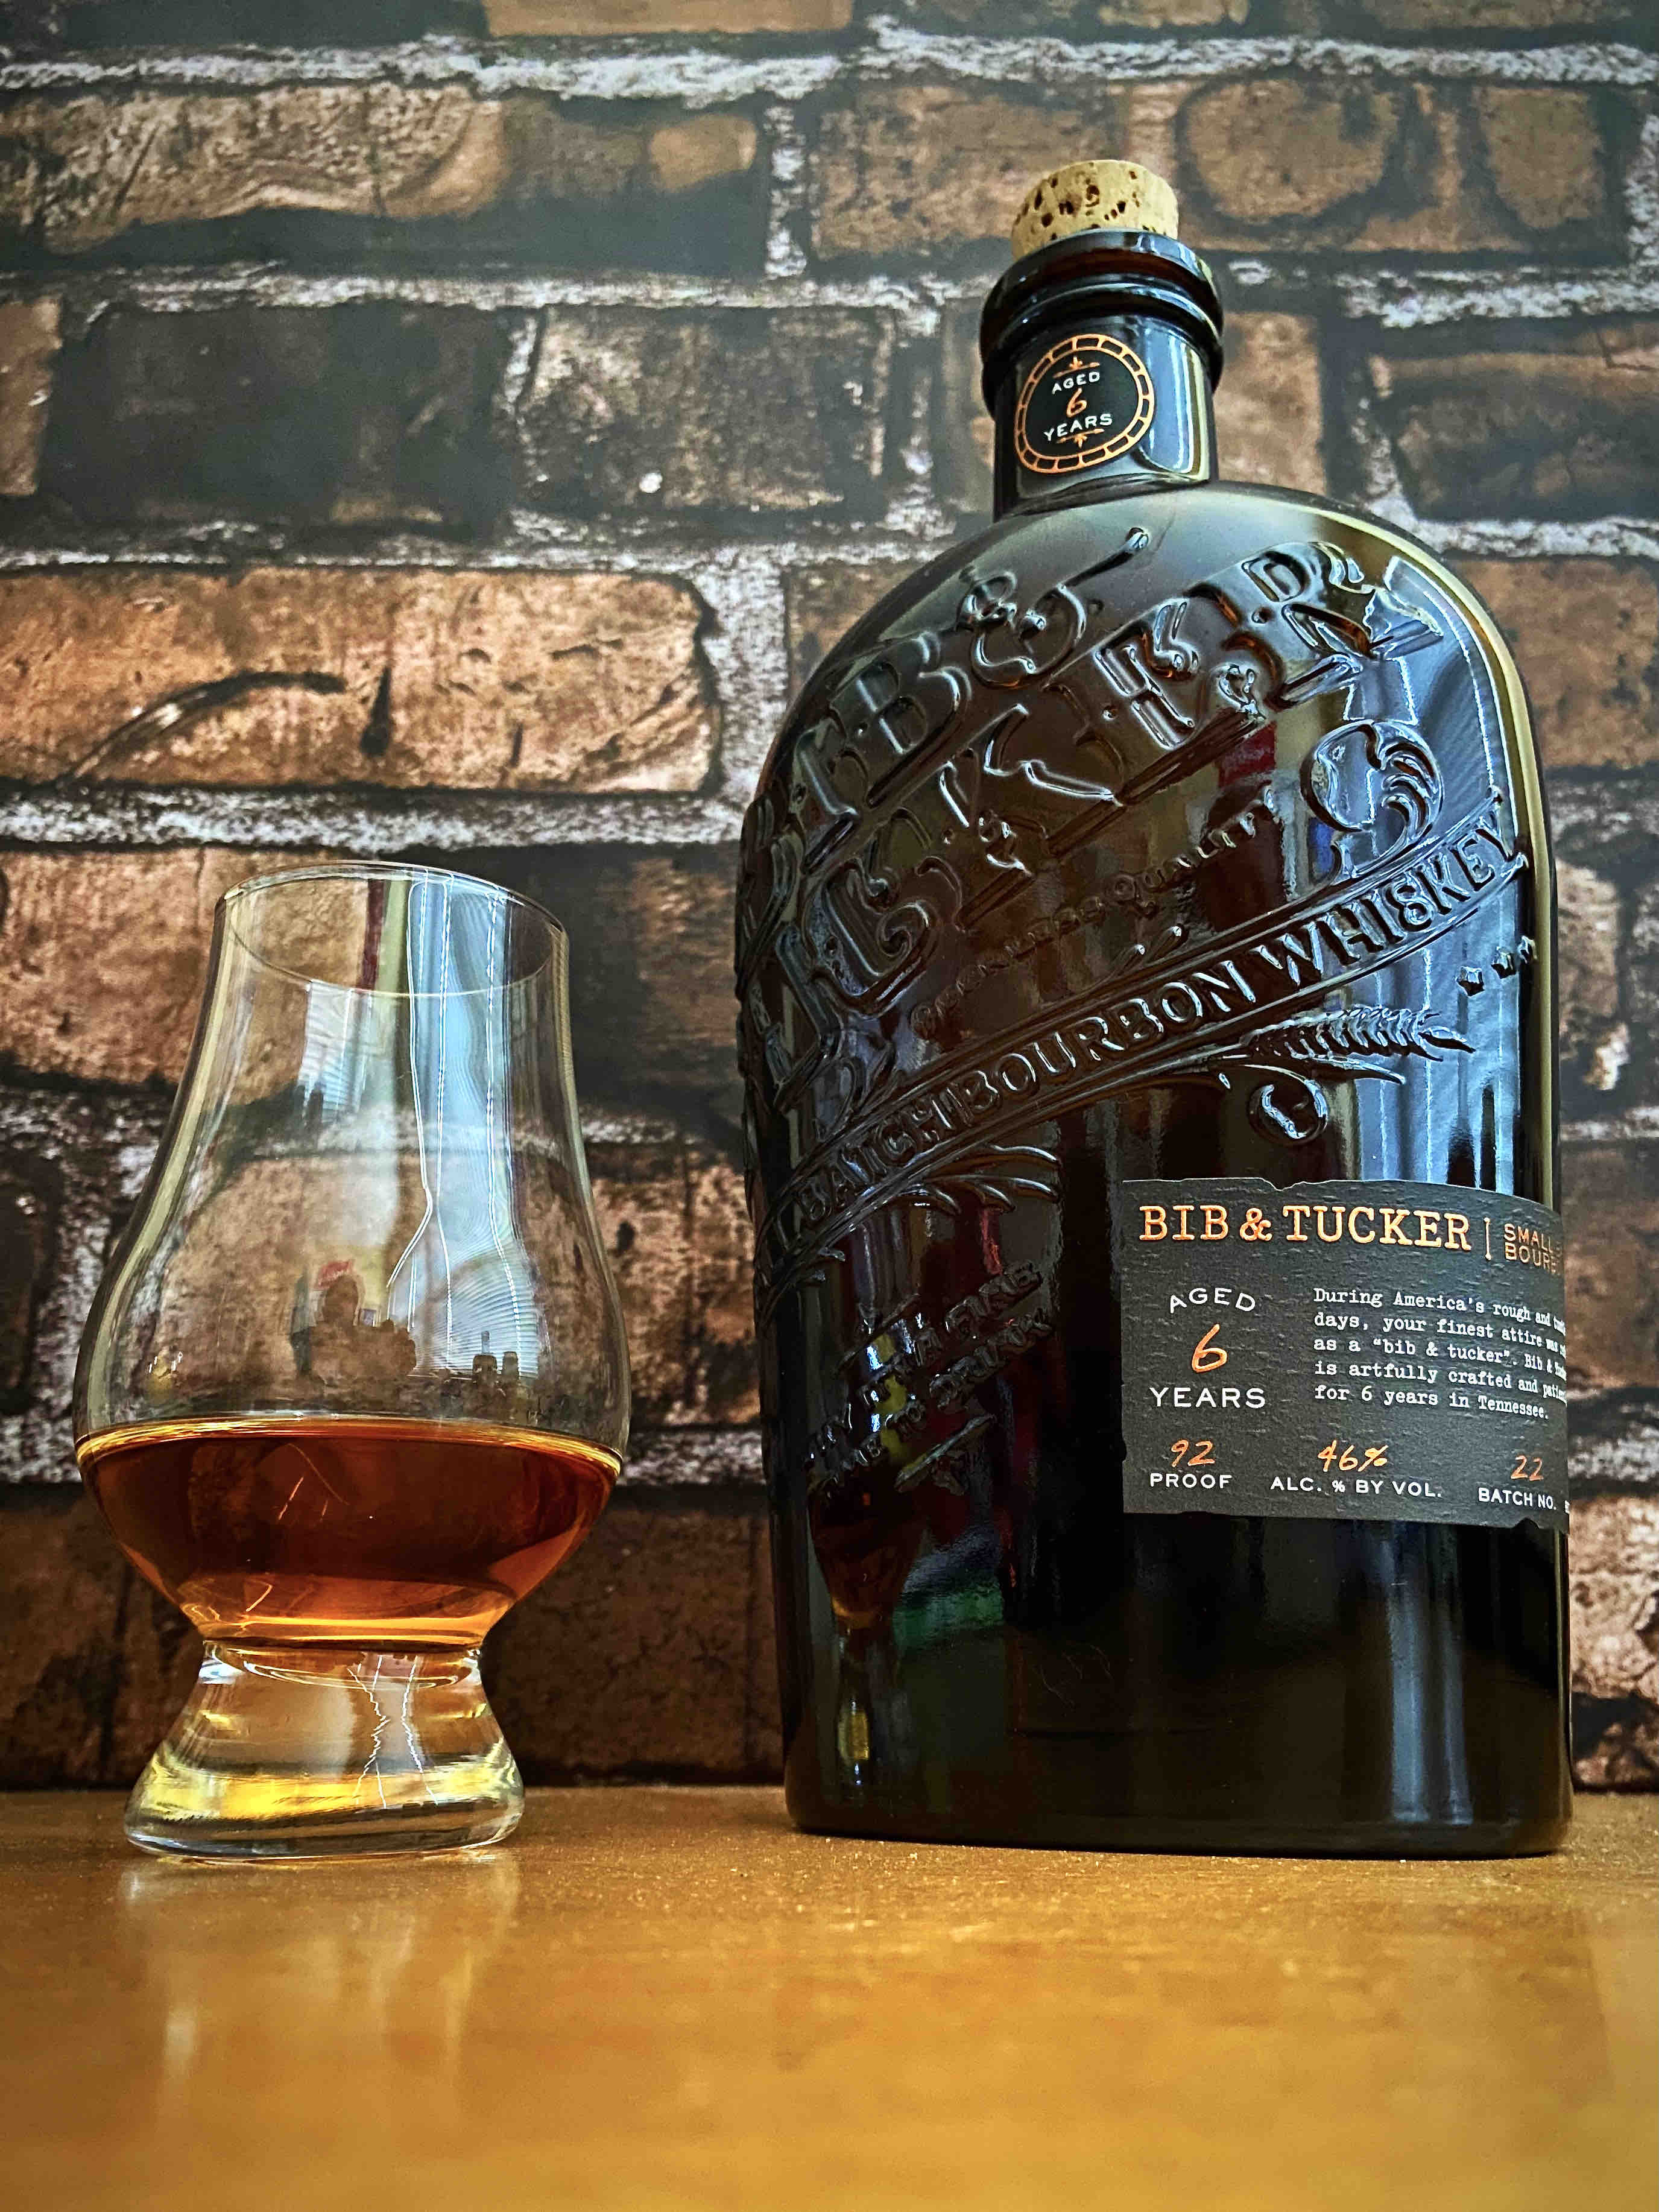 A neat pour of Bib & Tucker 6 Year Old Small Batch Bourbon Whiskey